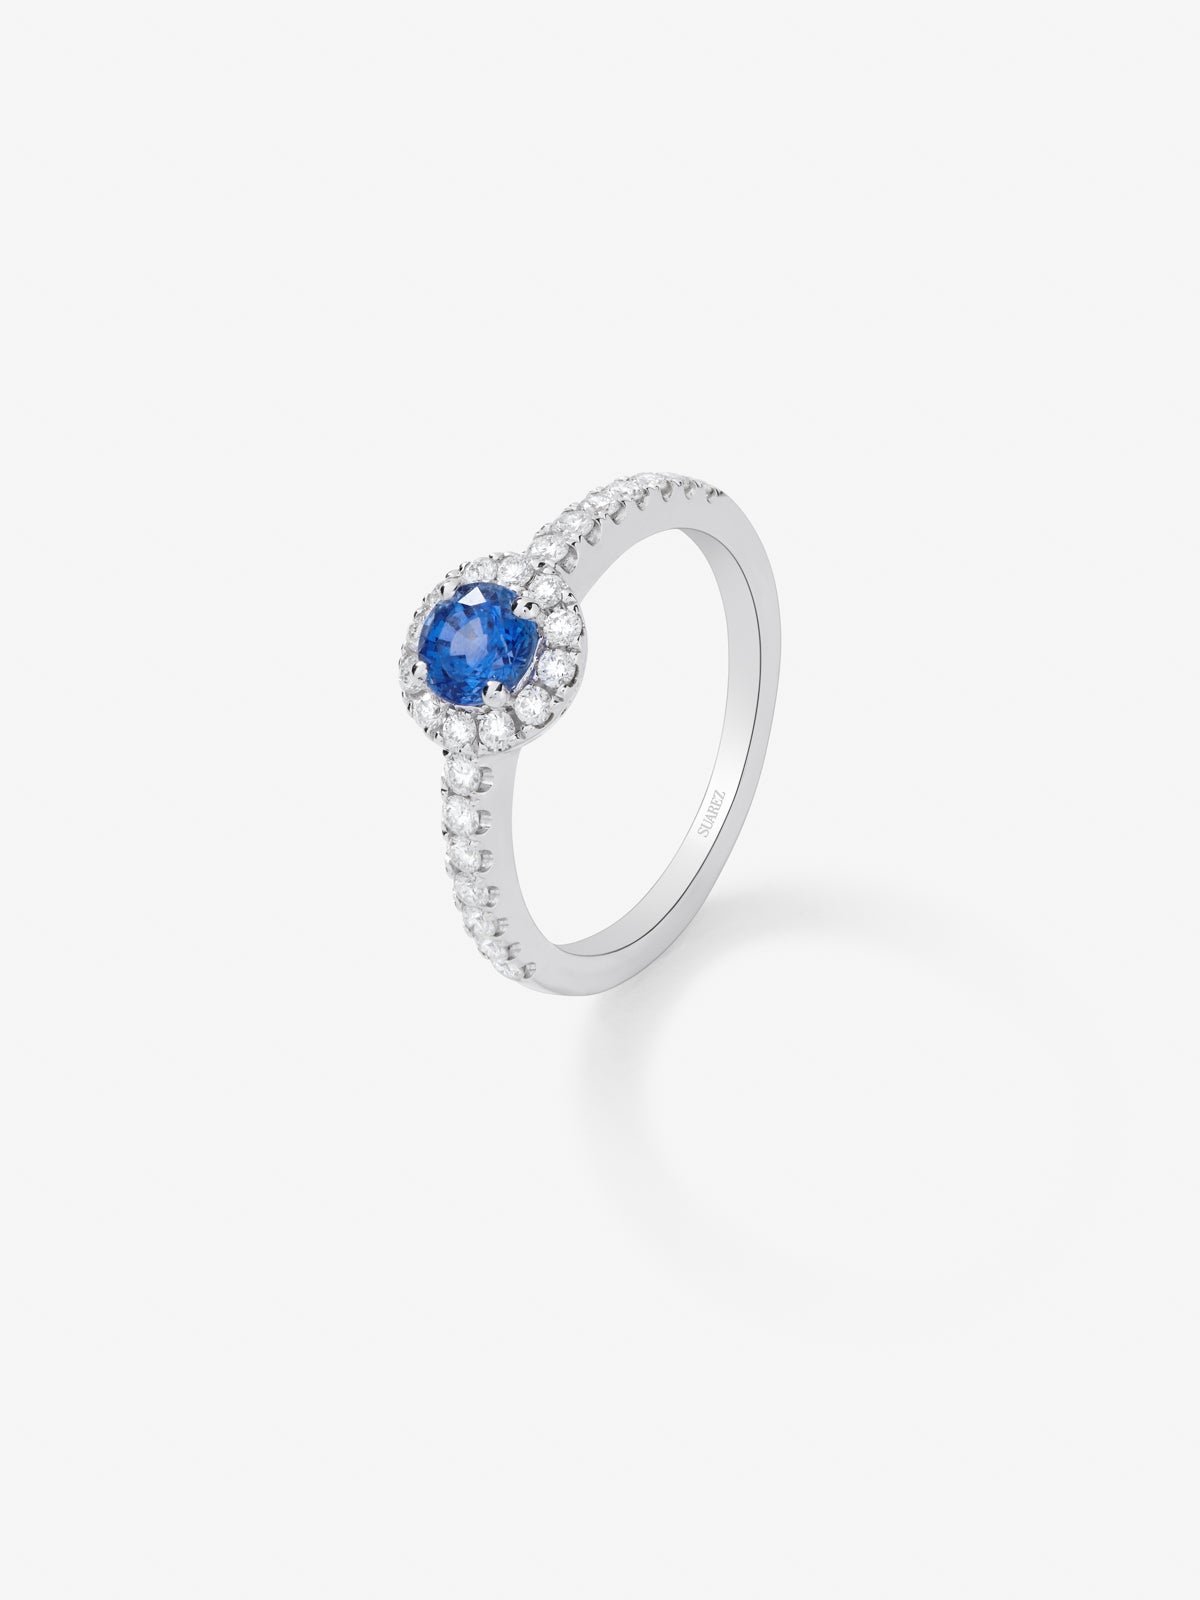 18K white gold ring with brilliant-cut blue sapphire of 0.35 cts and border and arm of 24 brilliant-cut diamonds with a total of 0.32 cts